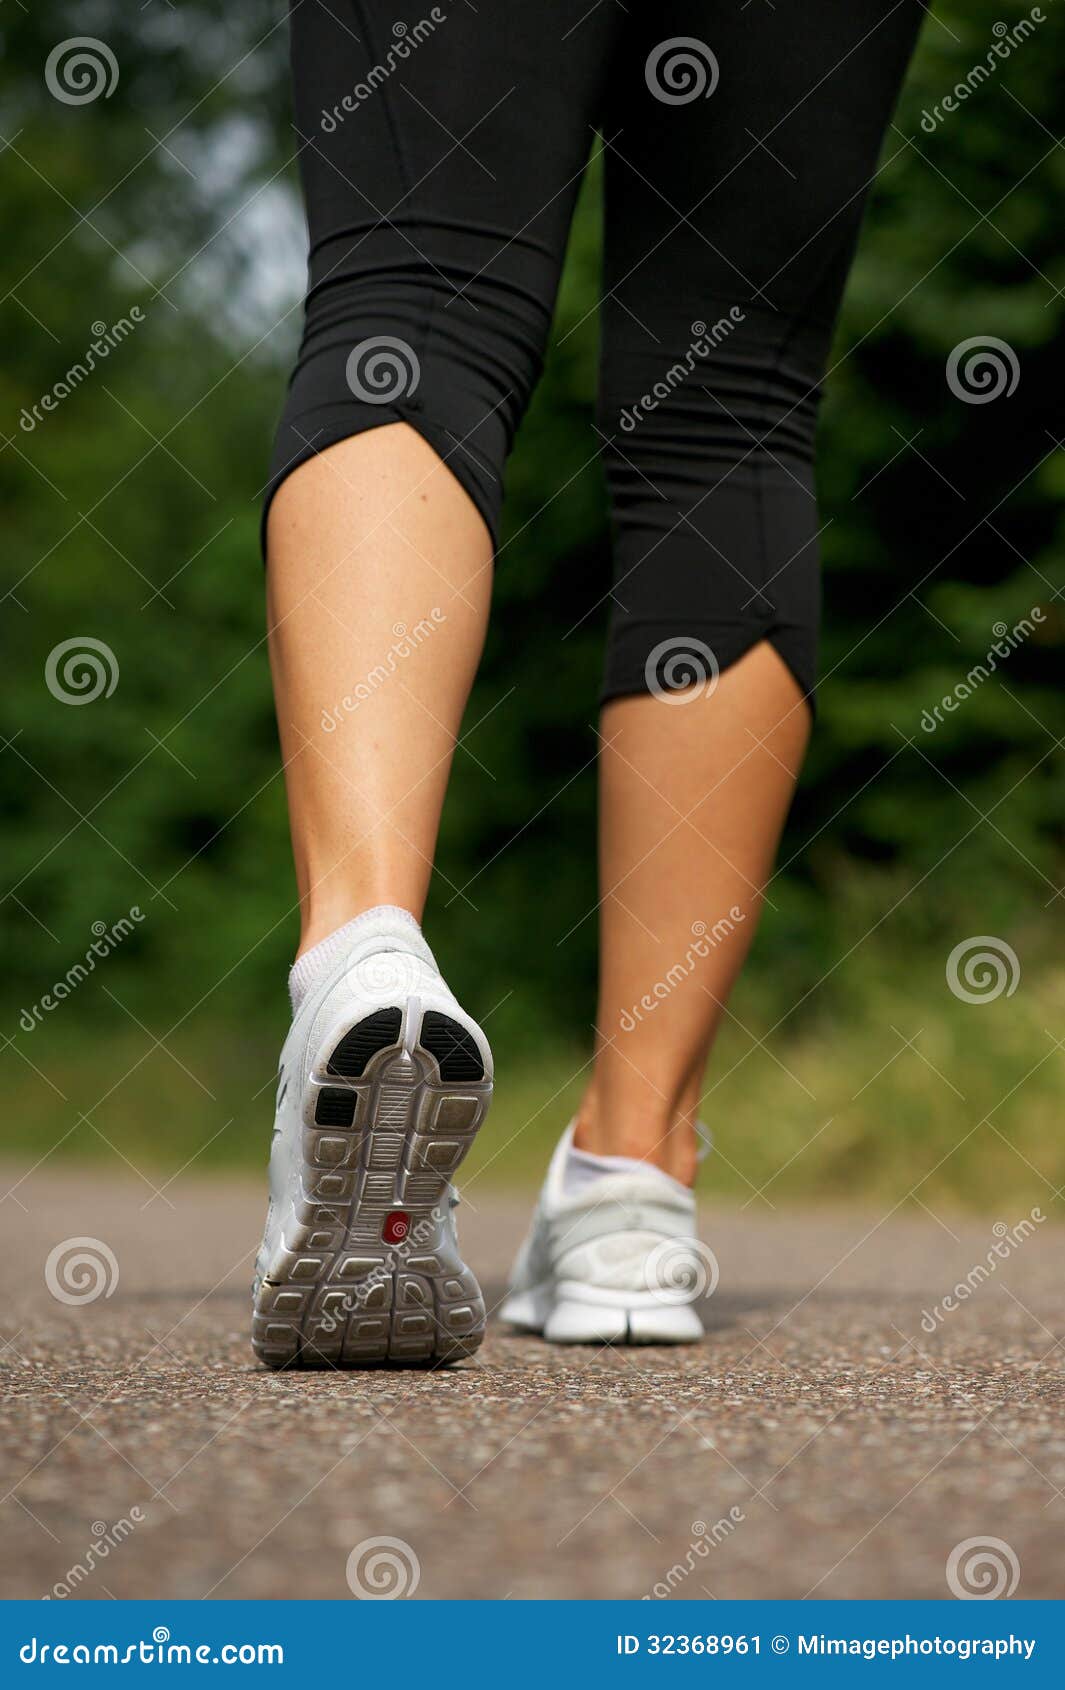 Young Woman Walking Outdoors In Park From Behind Stock Image - Image